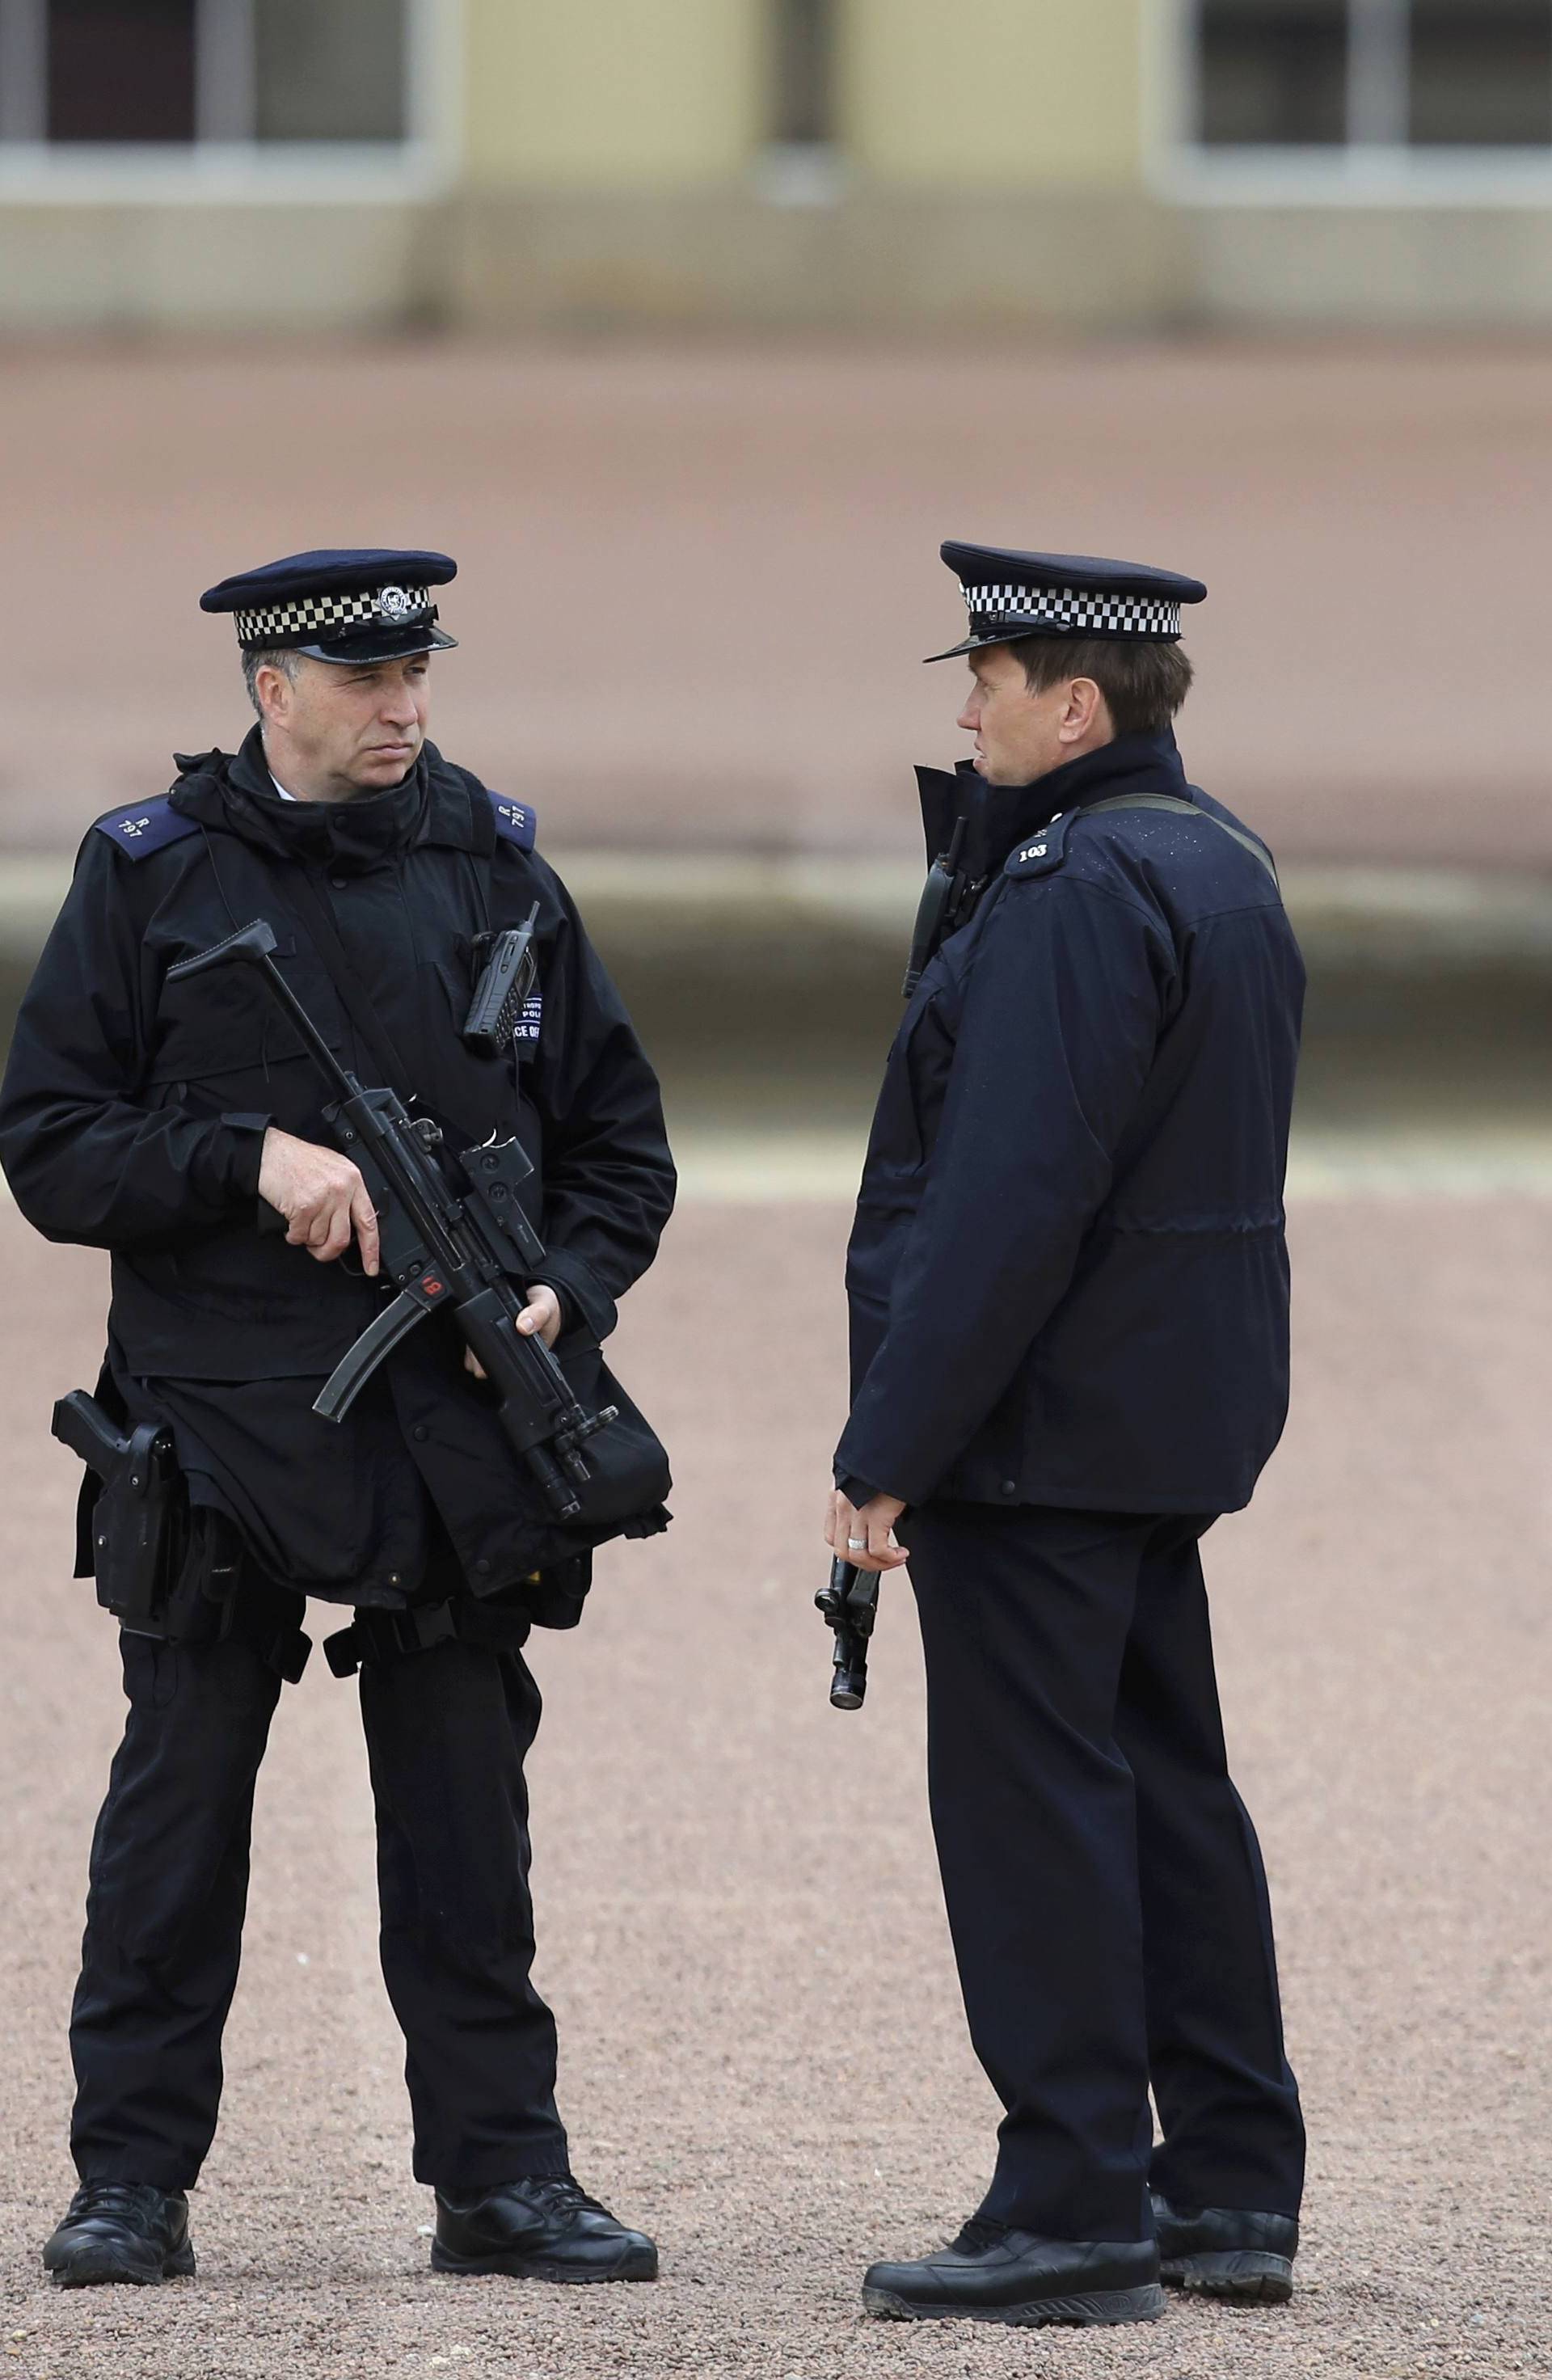 Armed police officers stand on duty at Buckingham Palace in London